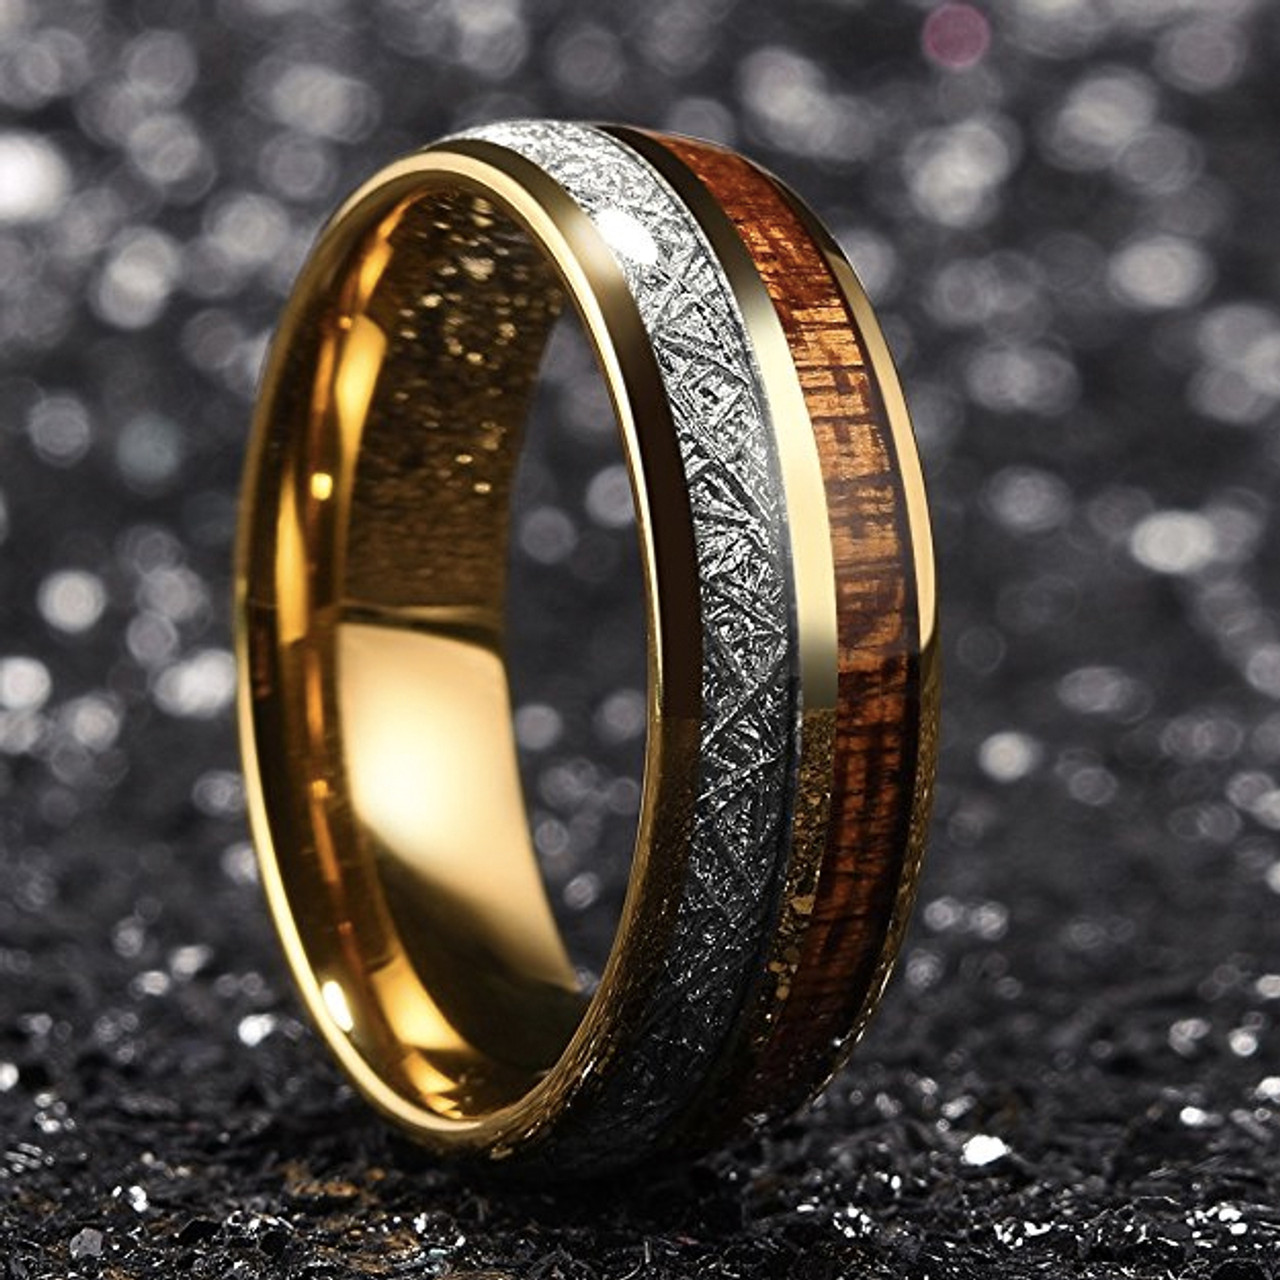 (8mm) Unisex, Women's or Men's Tungsten Carbide Wedding ring band. Domed Gold Band with Wood and Inspired Meteorite Inlay Ring